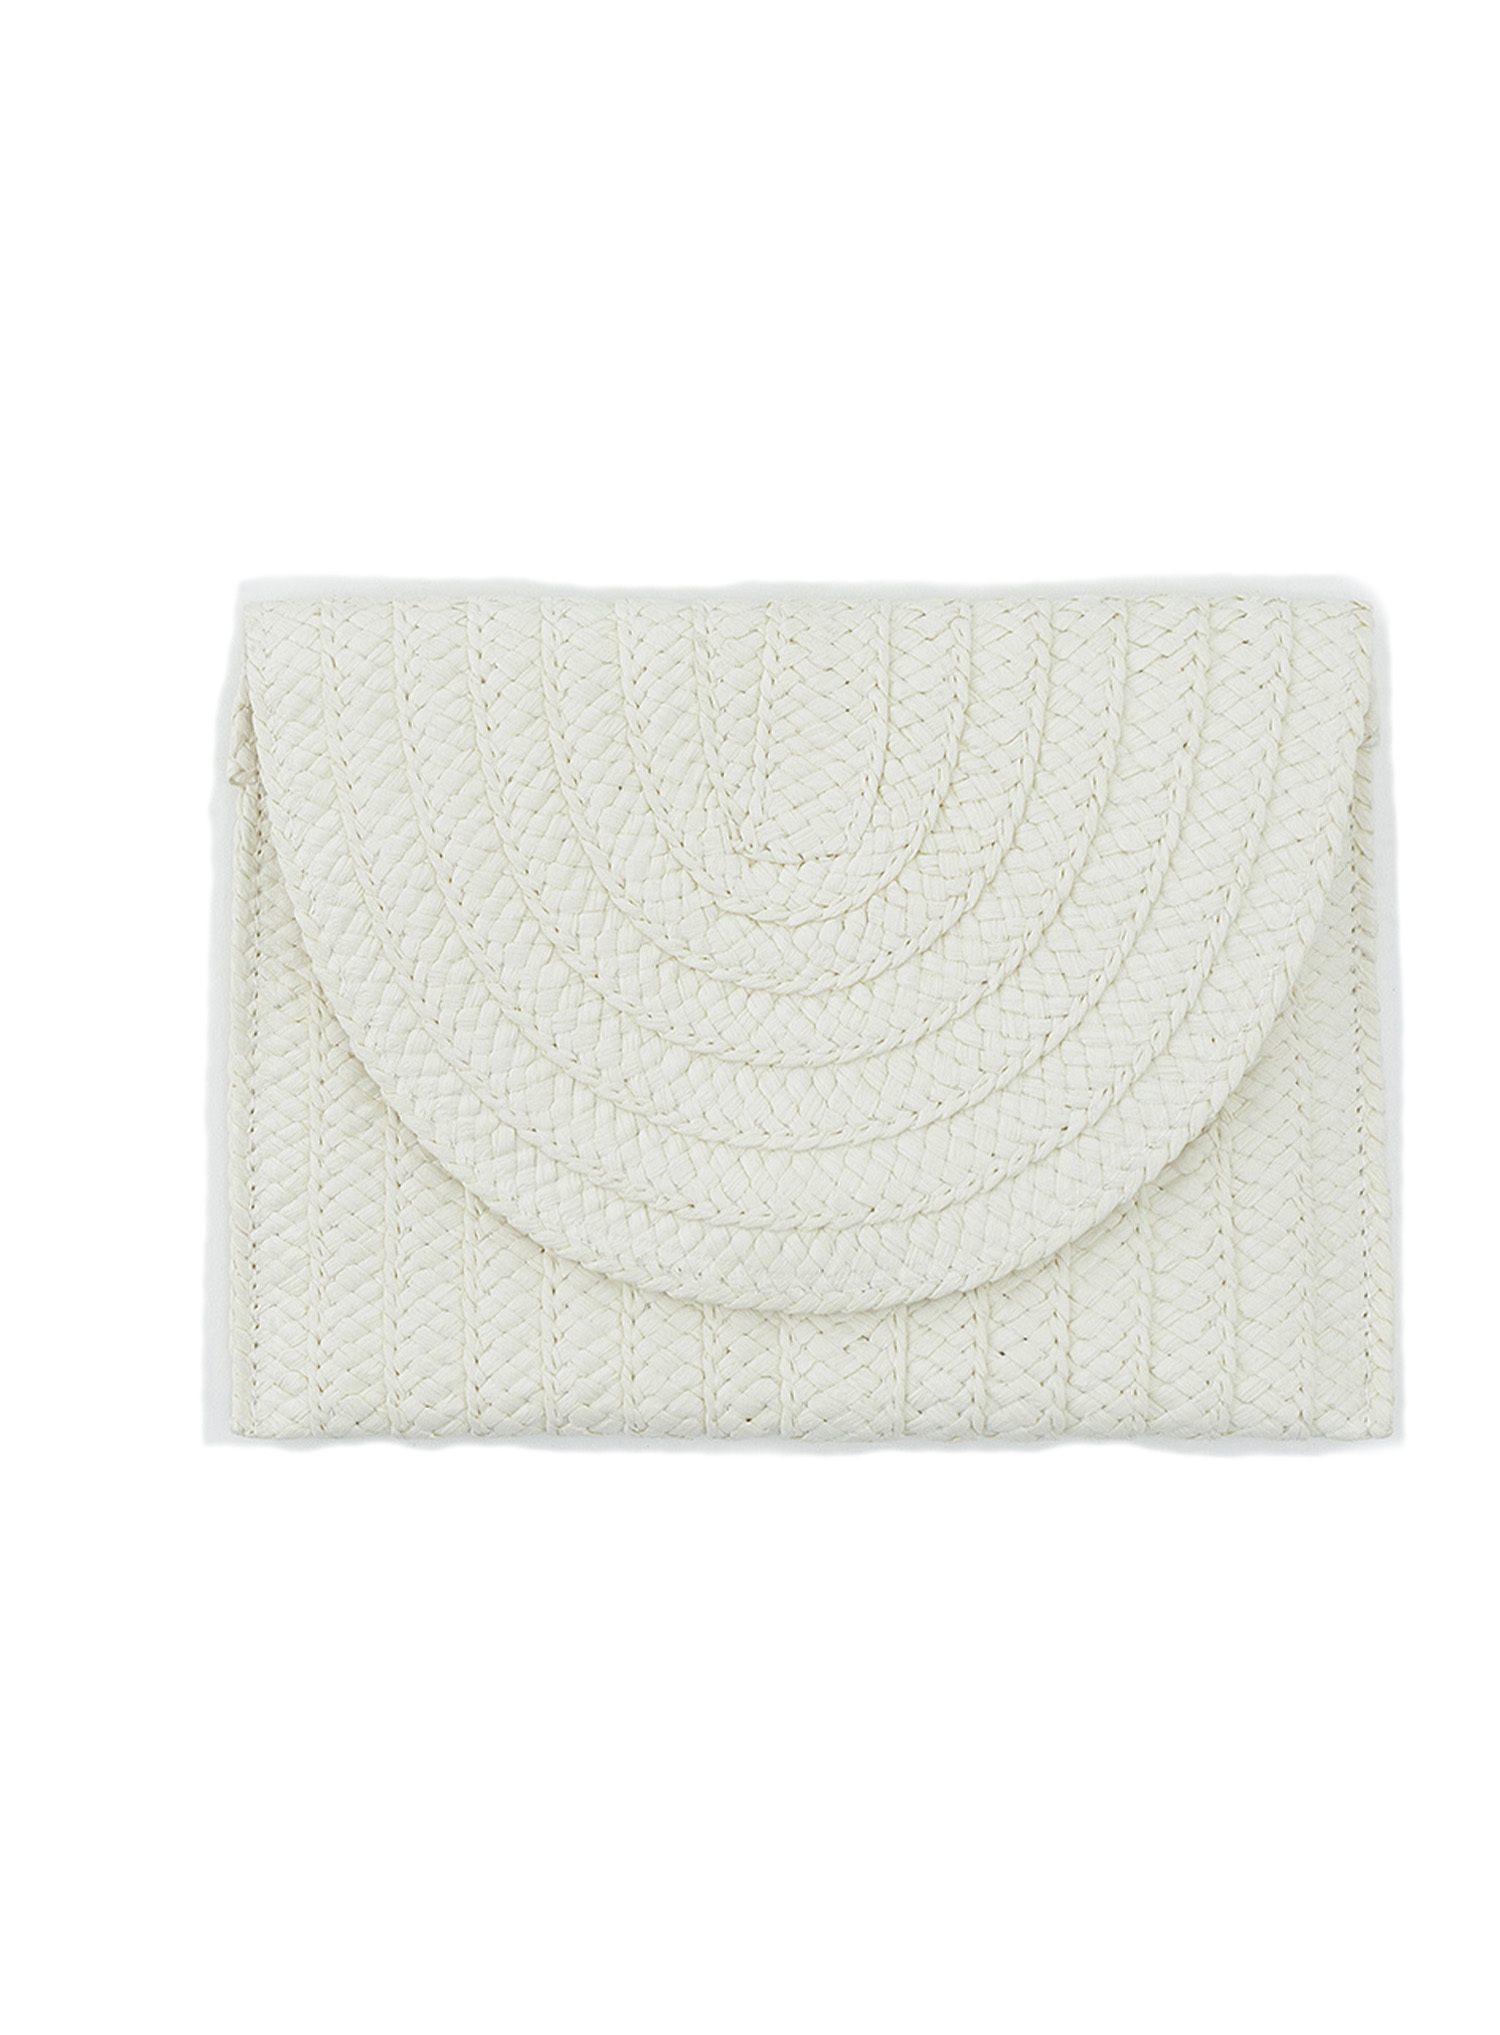 Handwoven straw clutch Image 0